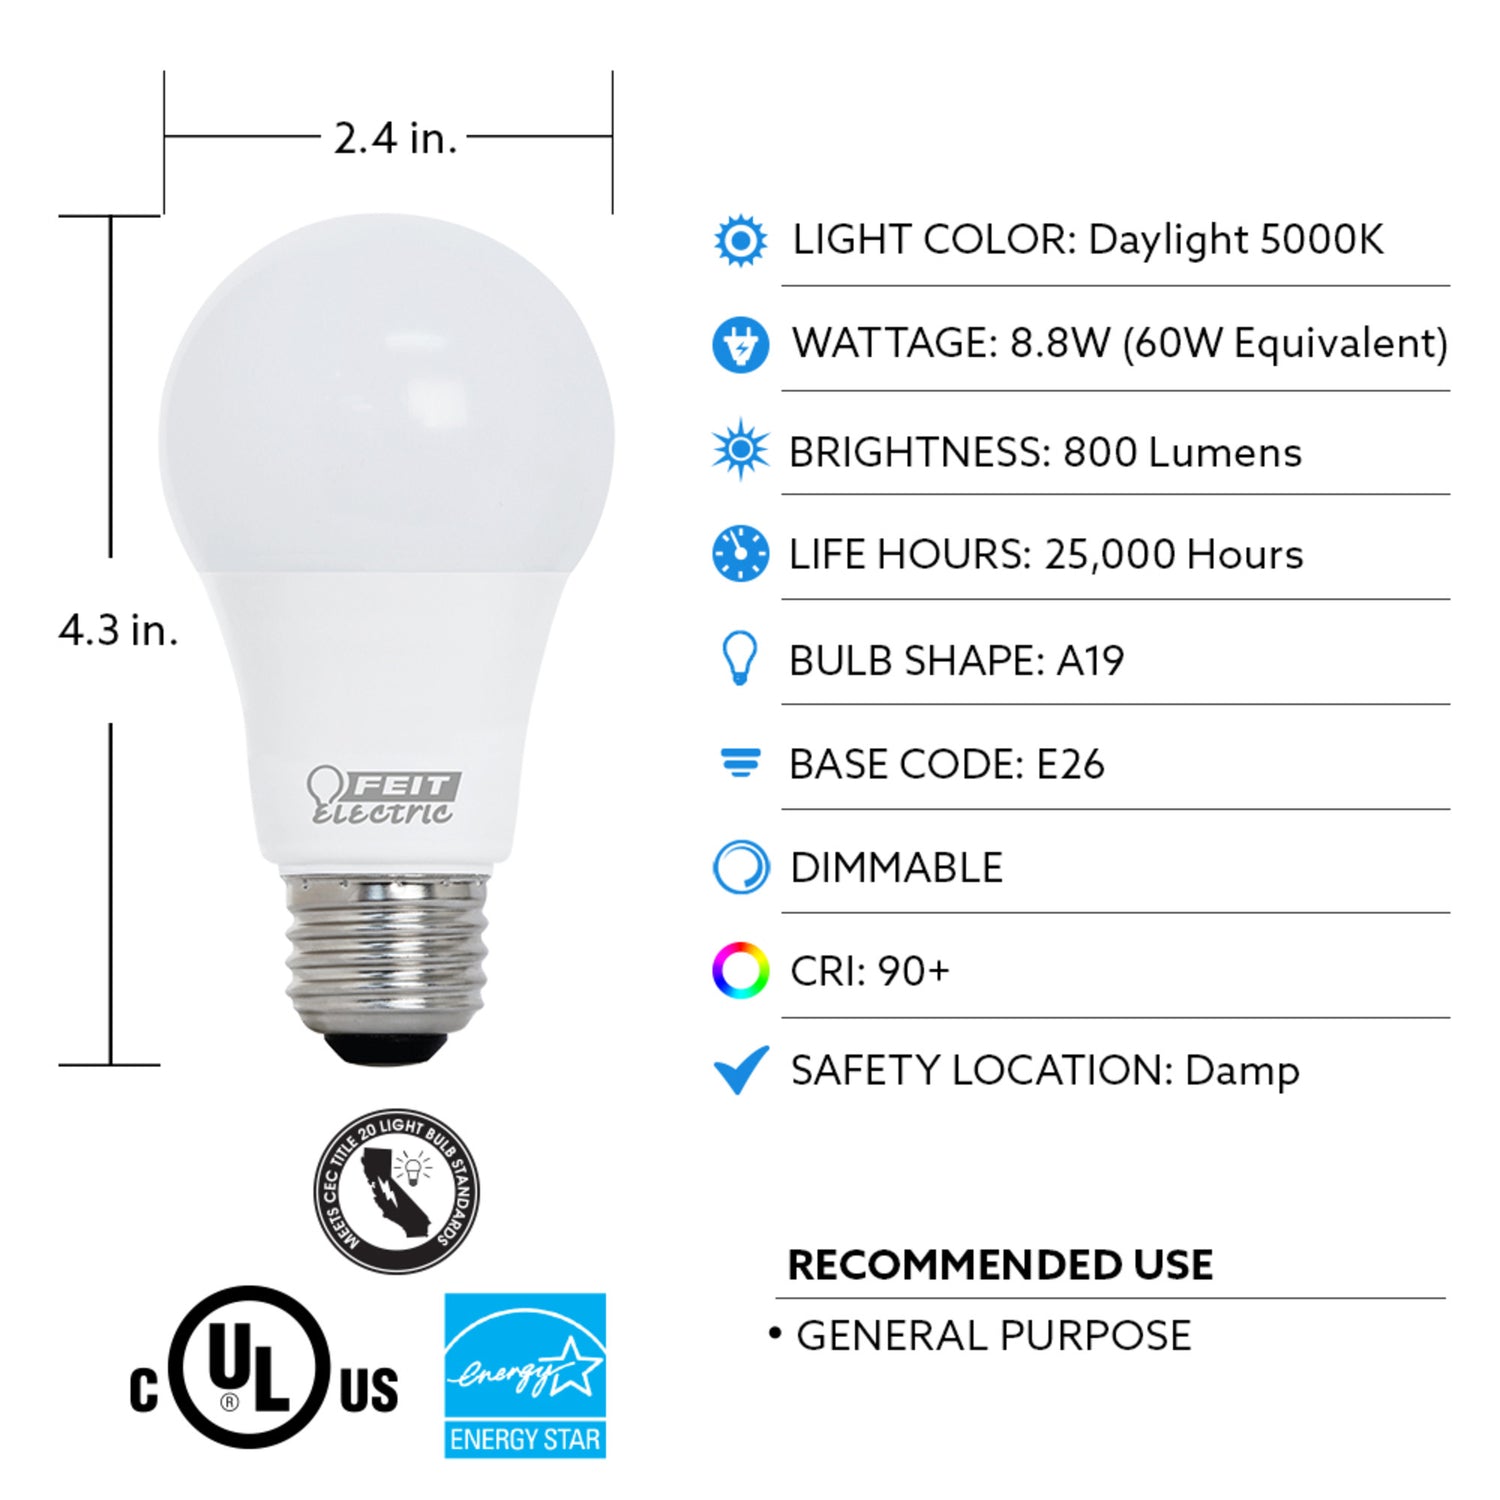 8.8W (60W Replacement) Daylight (5000K) A19 E26 Base Dimmable LED Bulb (4-Pack)